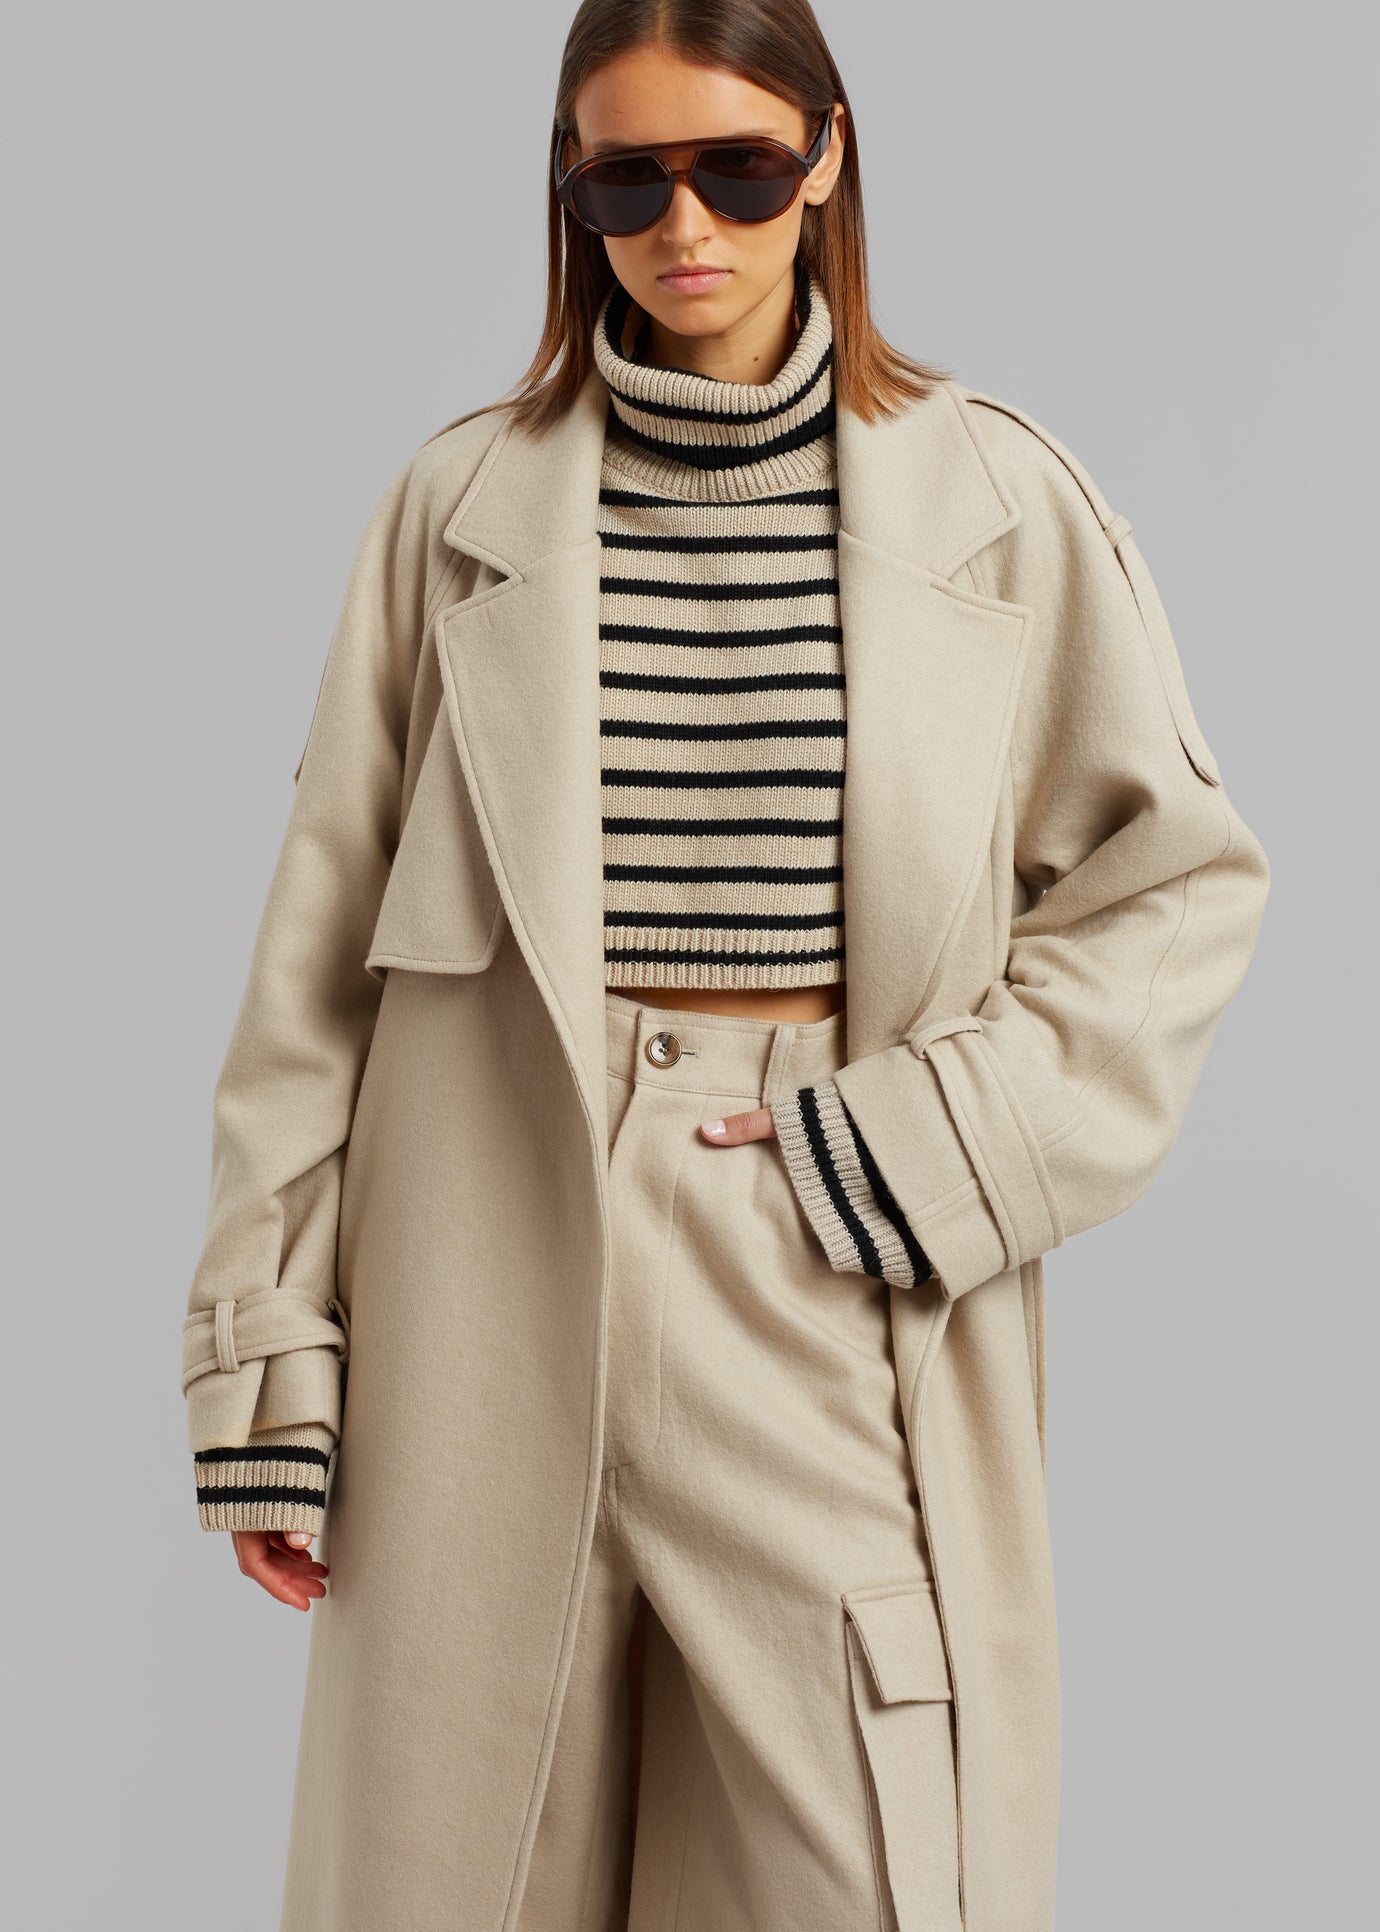 Suzanne Boiled Wool Trench Coat - Beige - 1